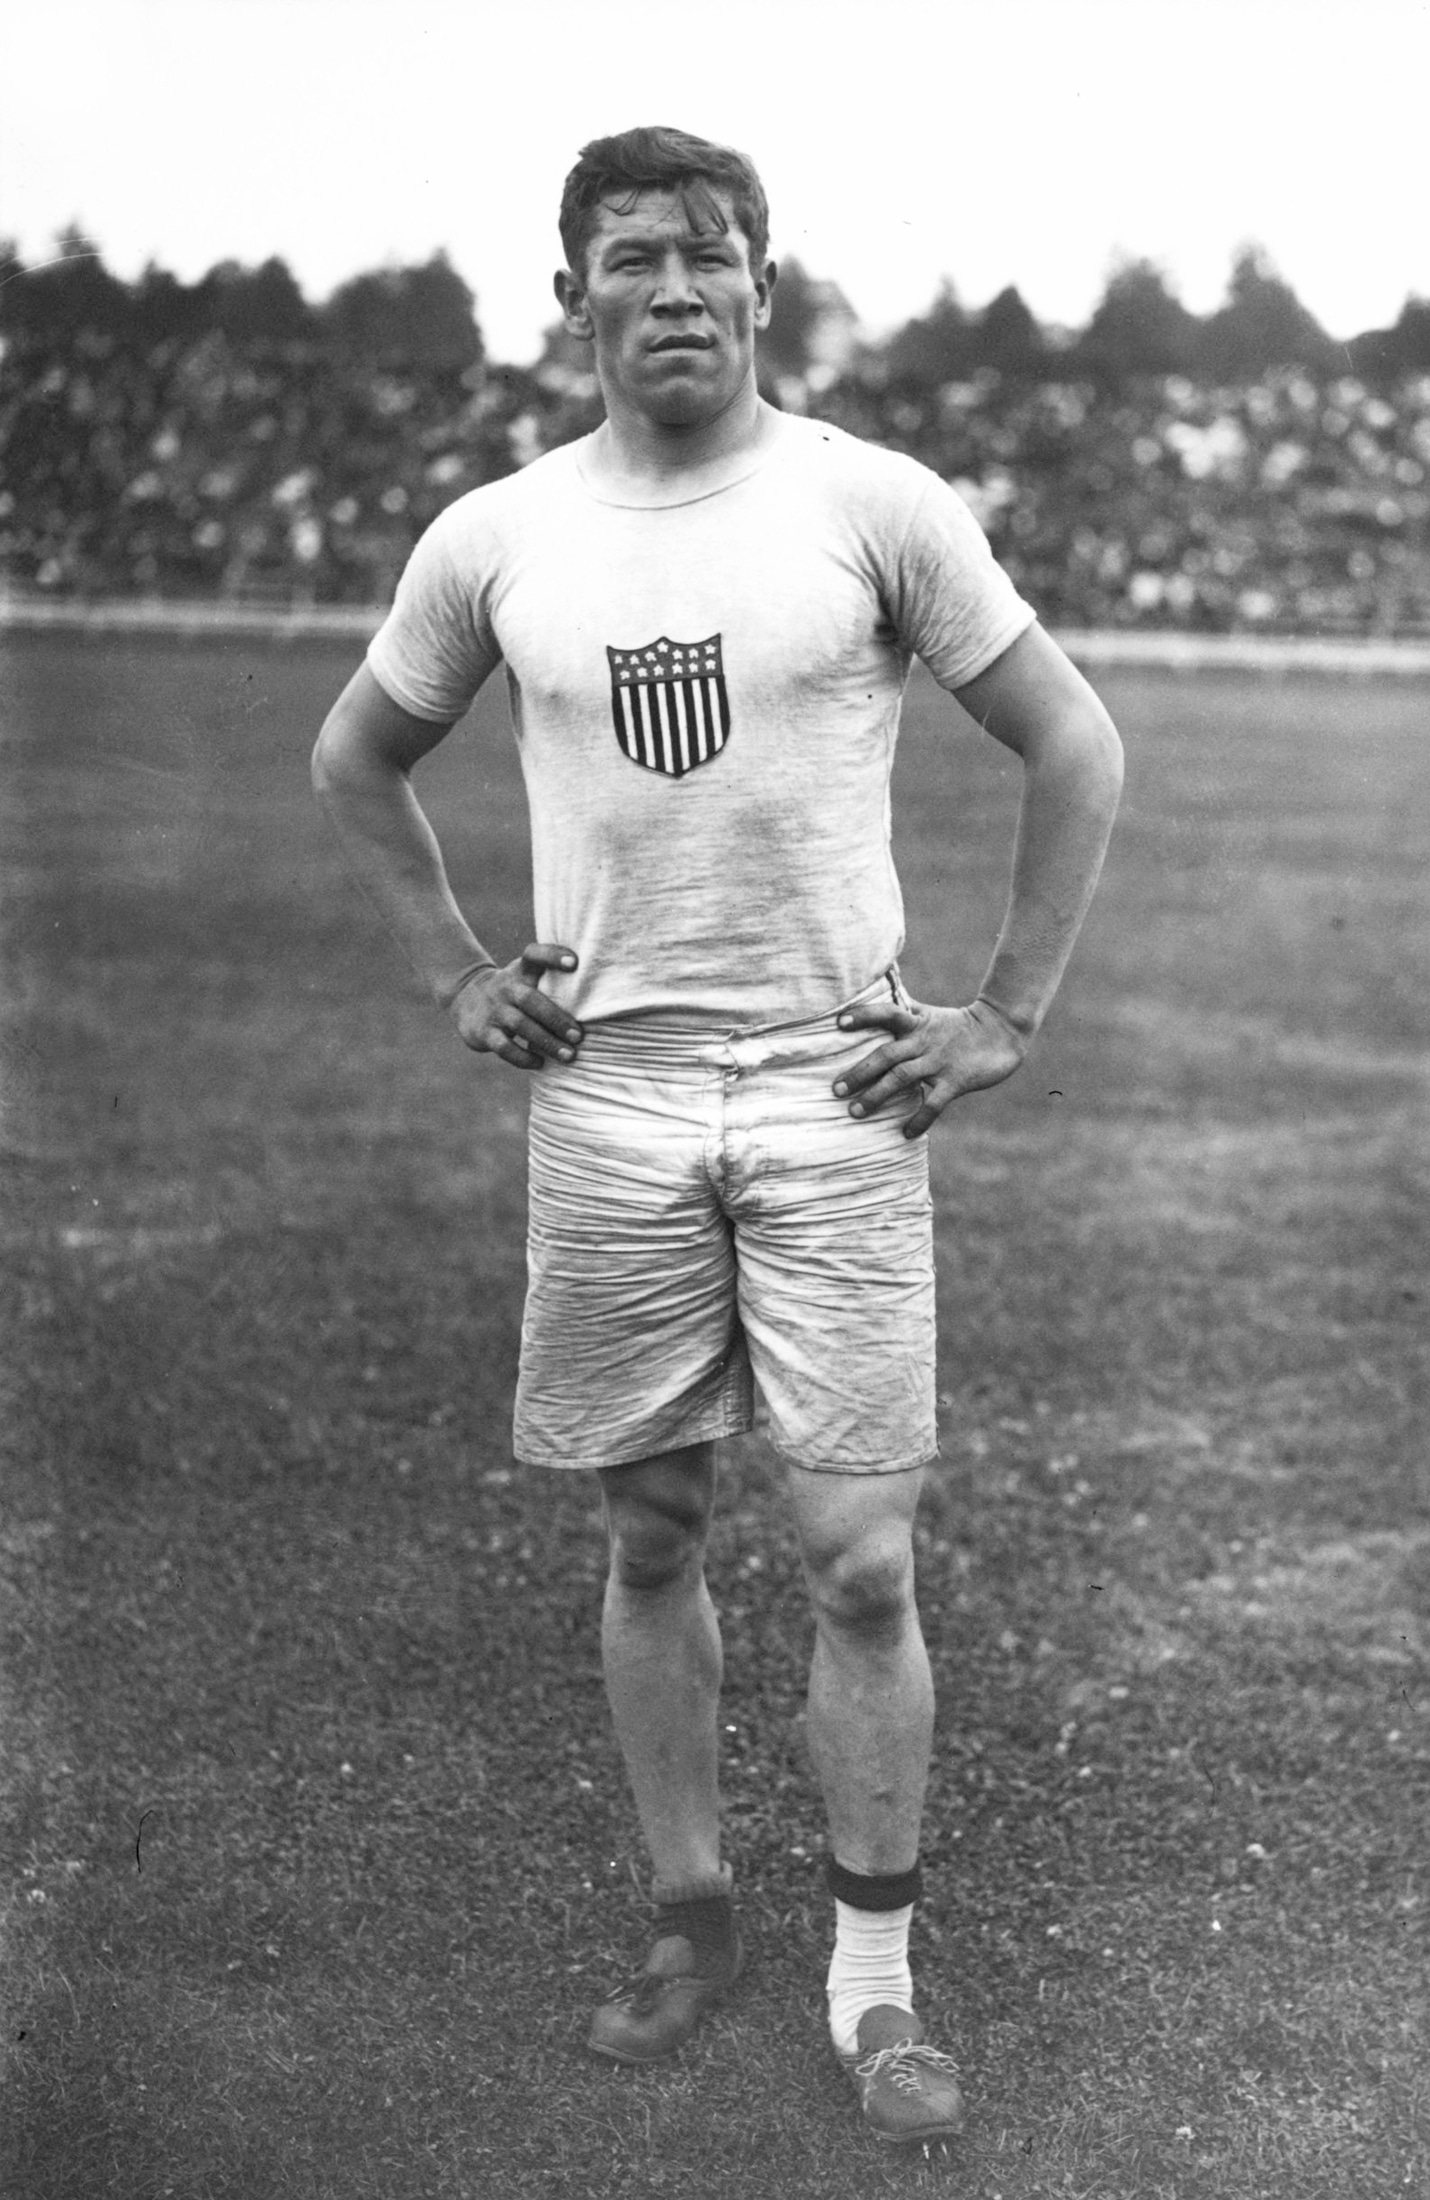 The fight to recognize Jim Thorpe as official Olympic gold medal winner